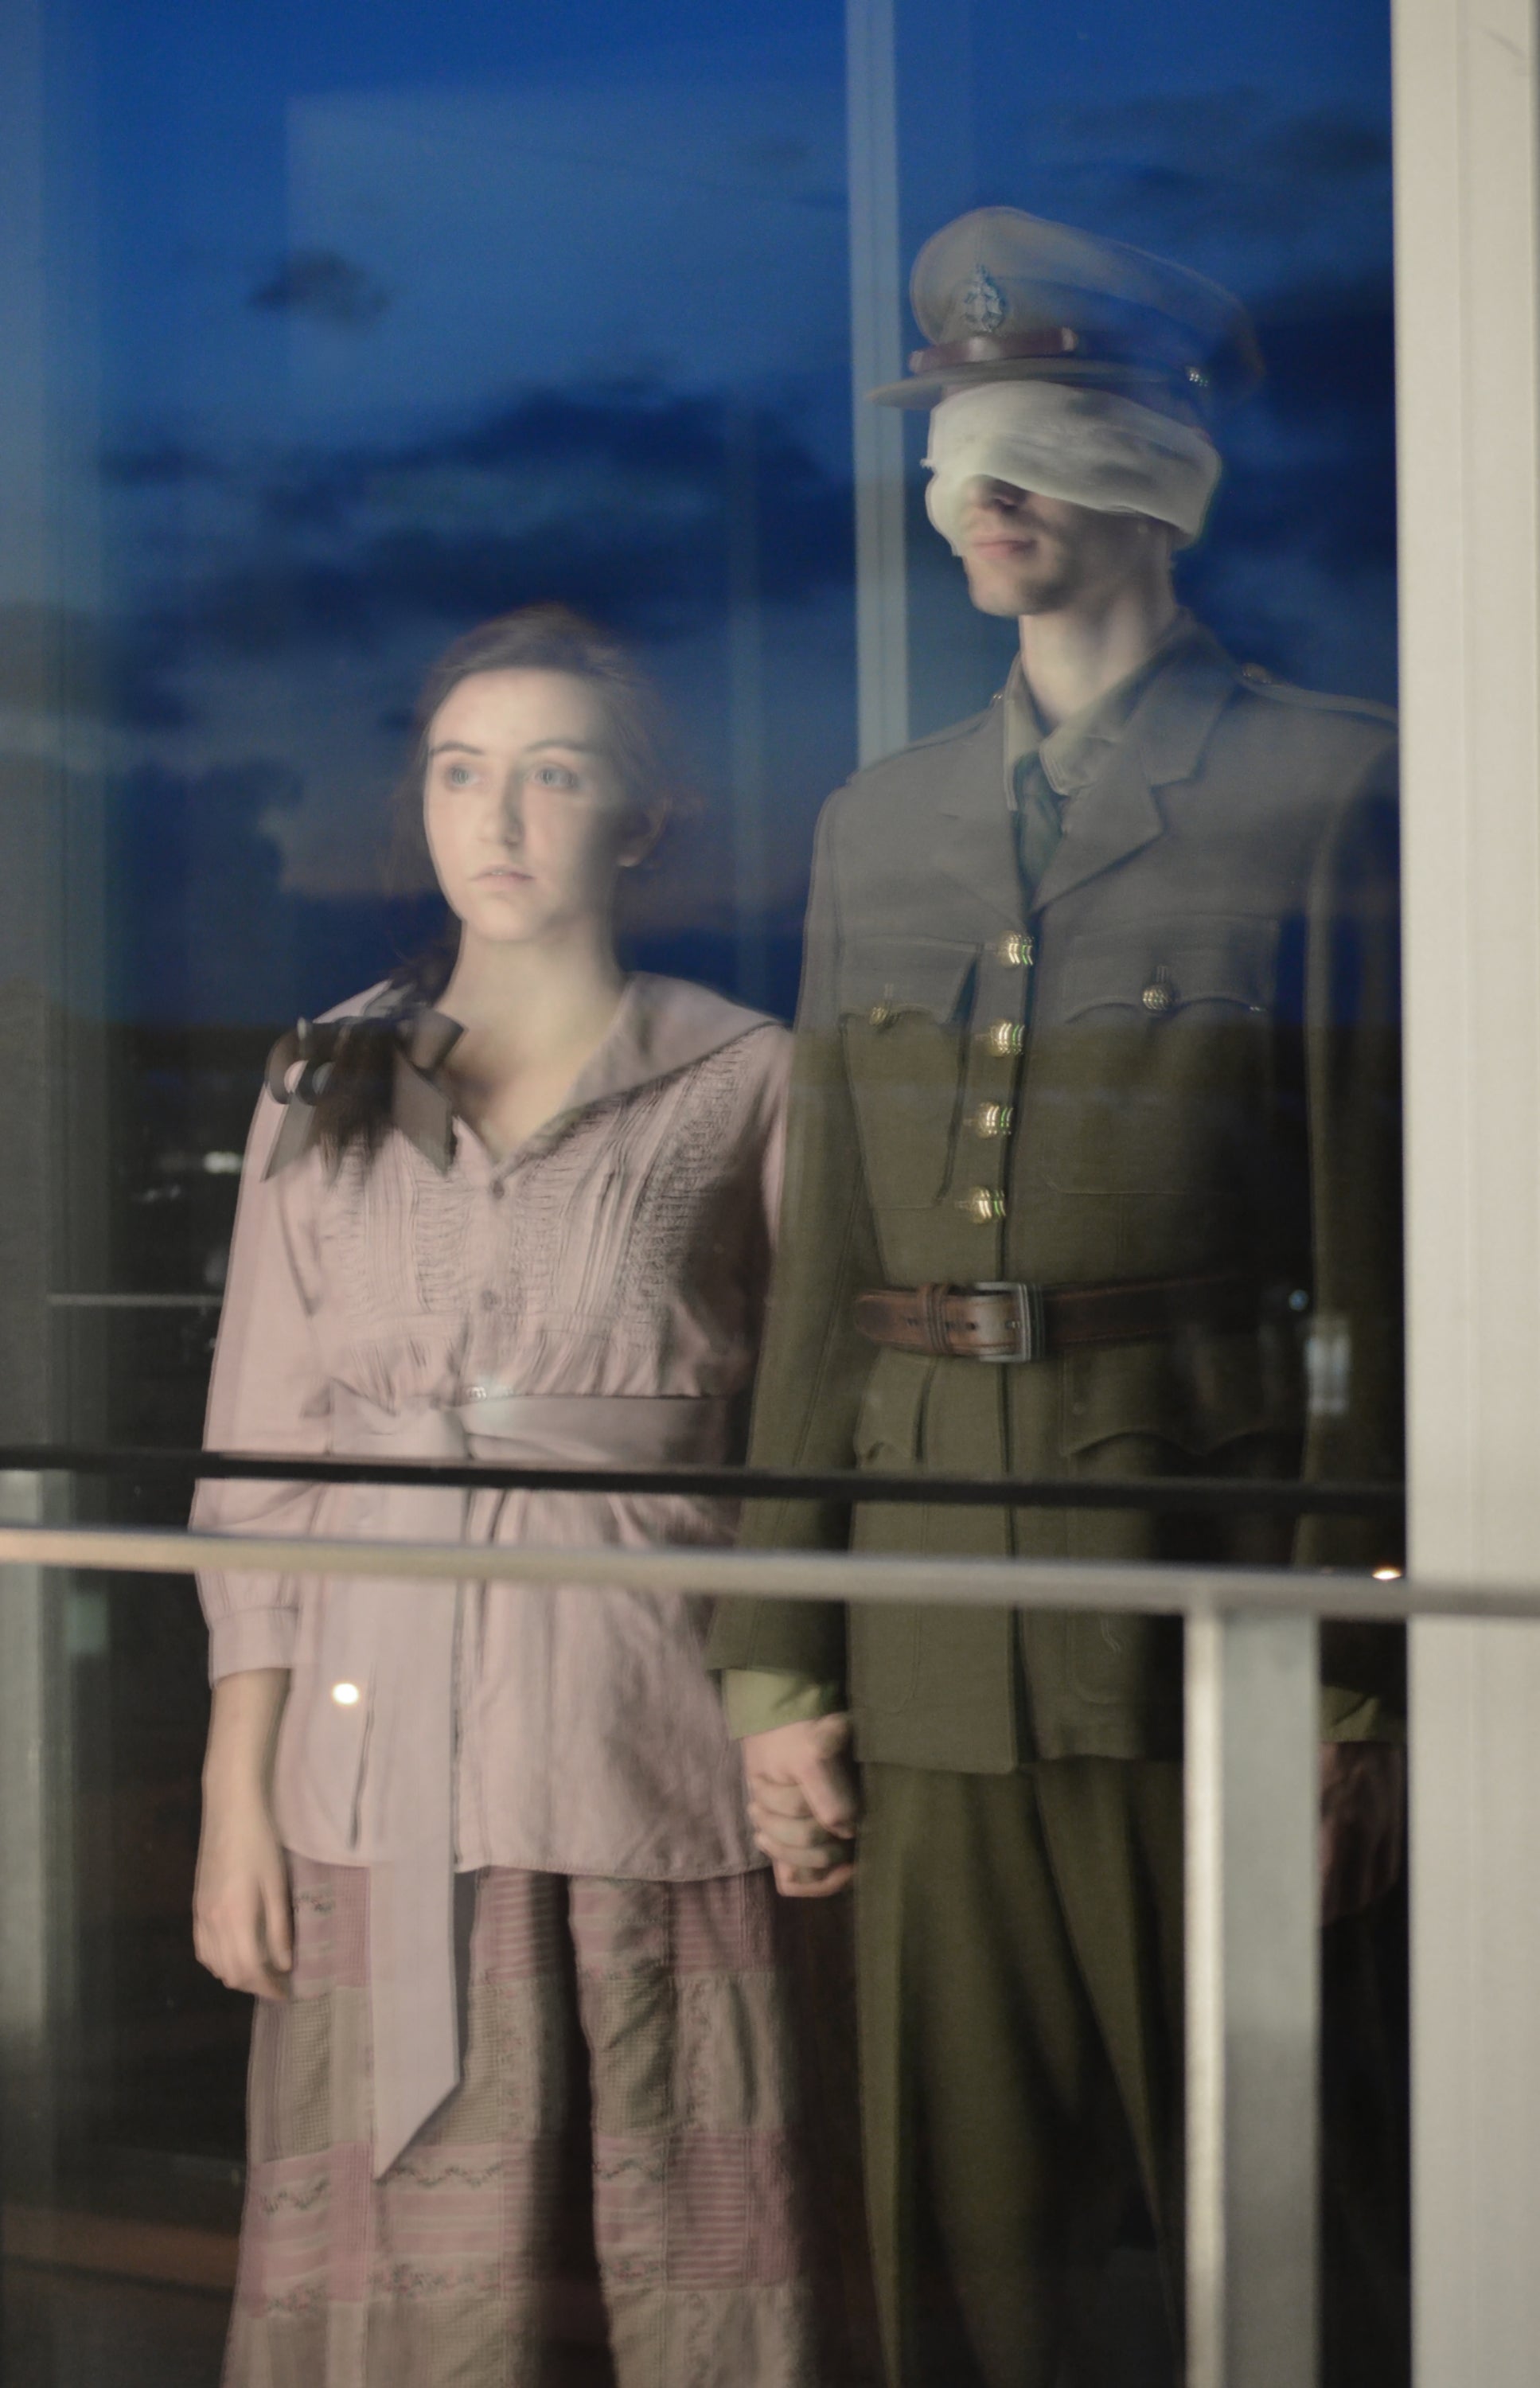 Woman and soldier looking through a window with clouds reflected